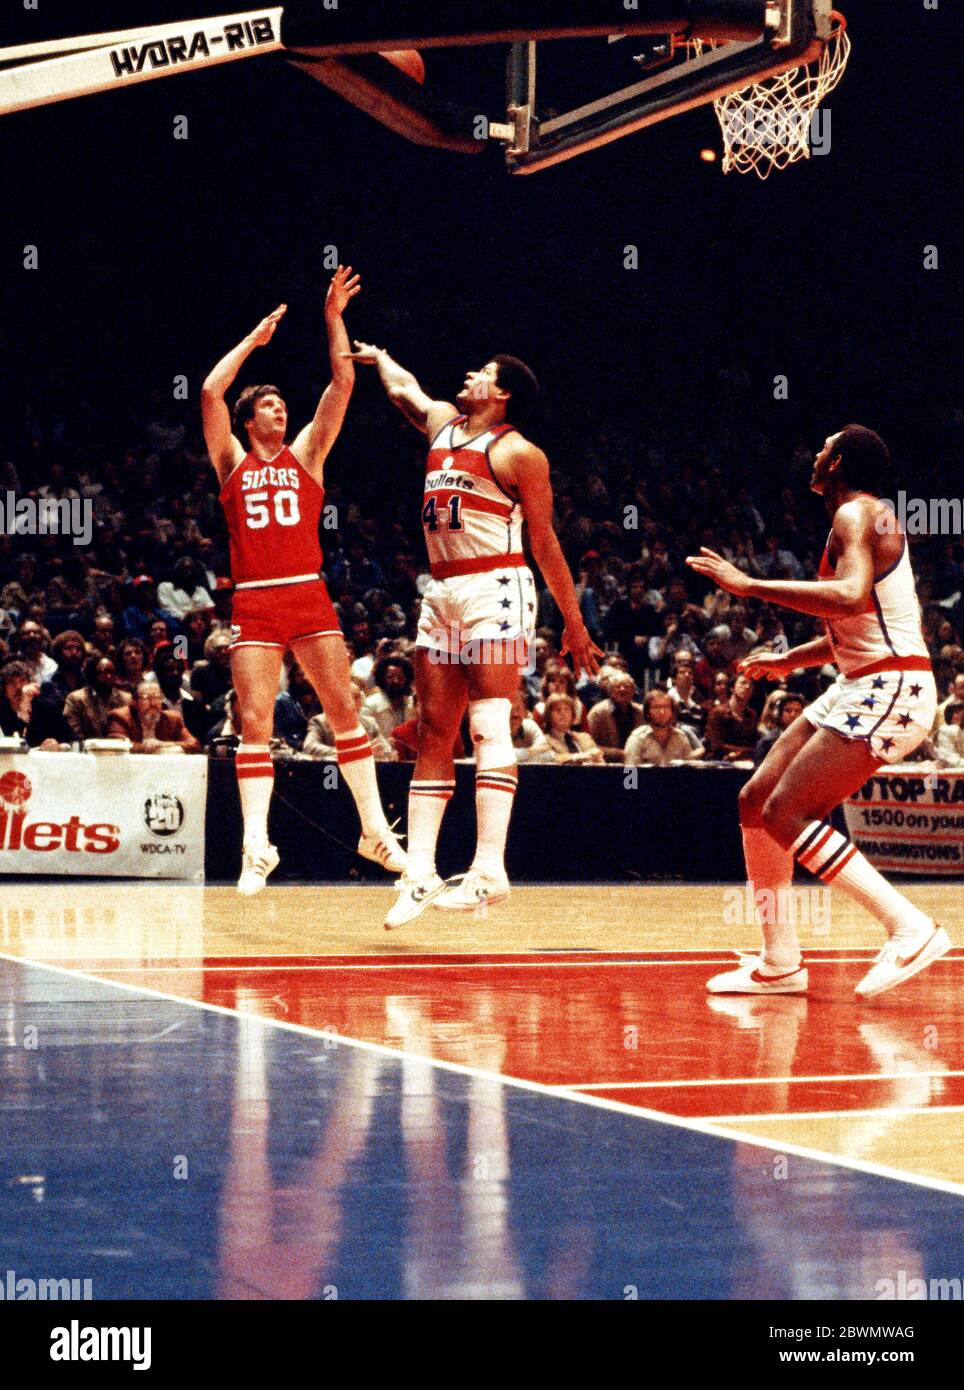 In this undated file photo, Washington Bullets (now Washington Wizards) center Wes Unseld (41) in game action against the Philadelphia 76ers at the Capital Centre in Landover, Maryland.  Unseld passed away on June 2, 2020 at the age of 74.Credit: Arnie Sachs / CNP | usage worldwide Stock Photo